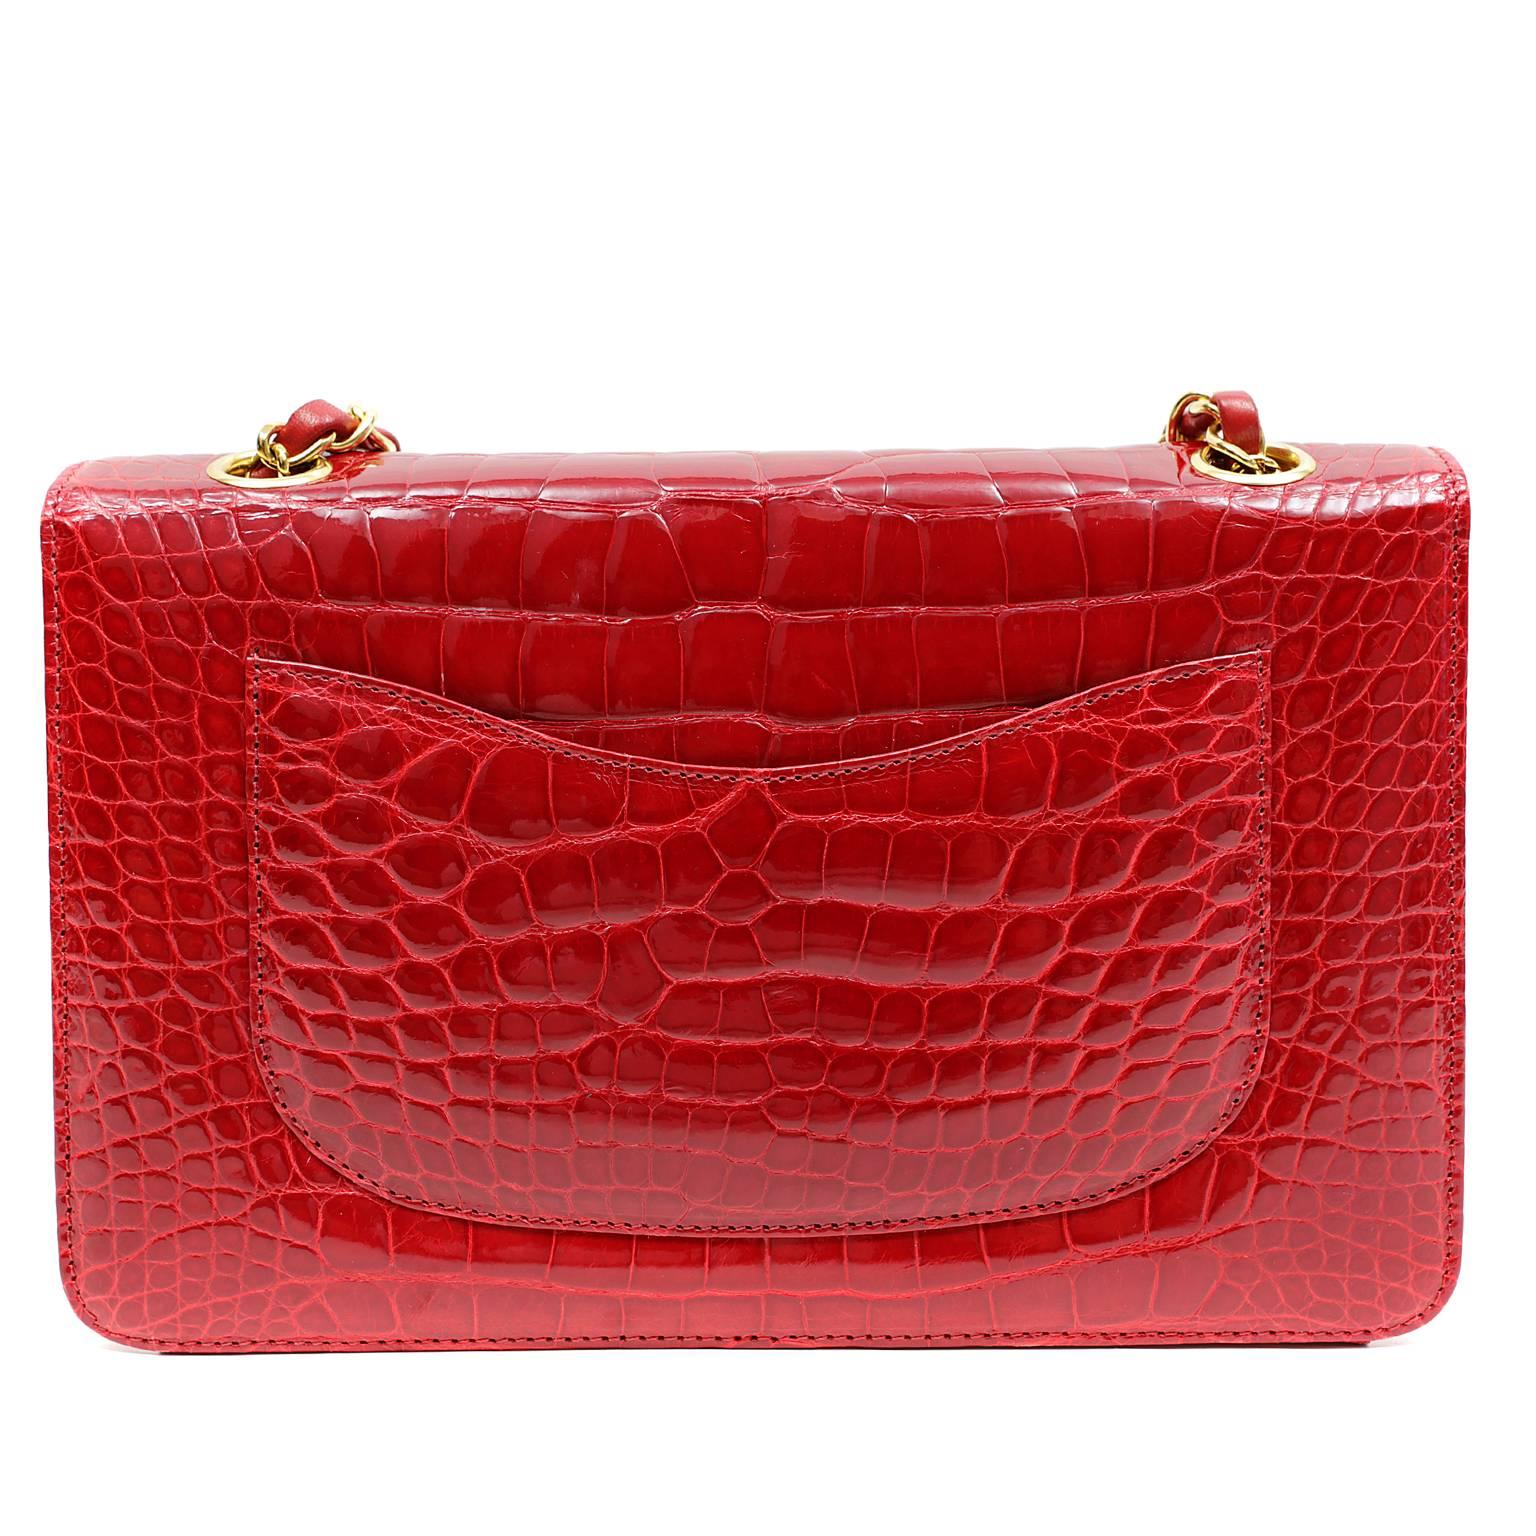 Chanel Red Crocodile Medium Classic Flap- PRISTINE
  The timeless silhouette is incredibly rare in exotic crocodile; truly beautiful and extremely collectible.
Red crocodile skin with gold interlocking cc twist lock on single flap.  Leather and